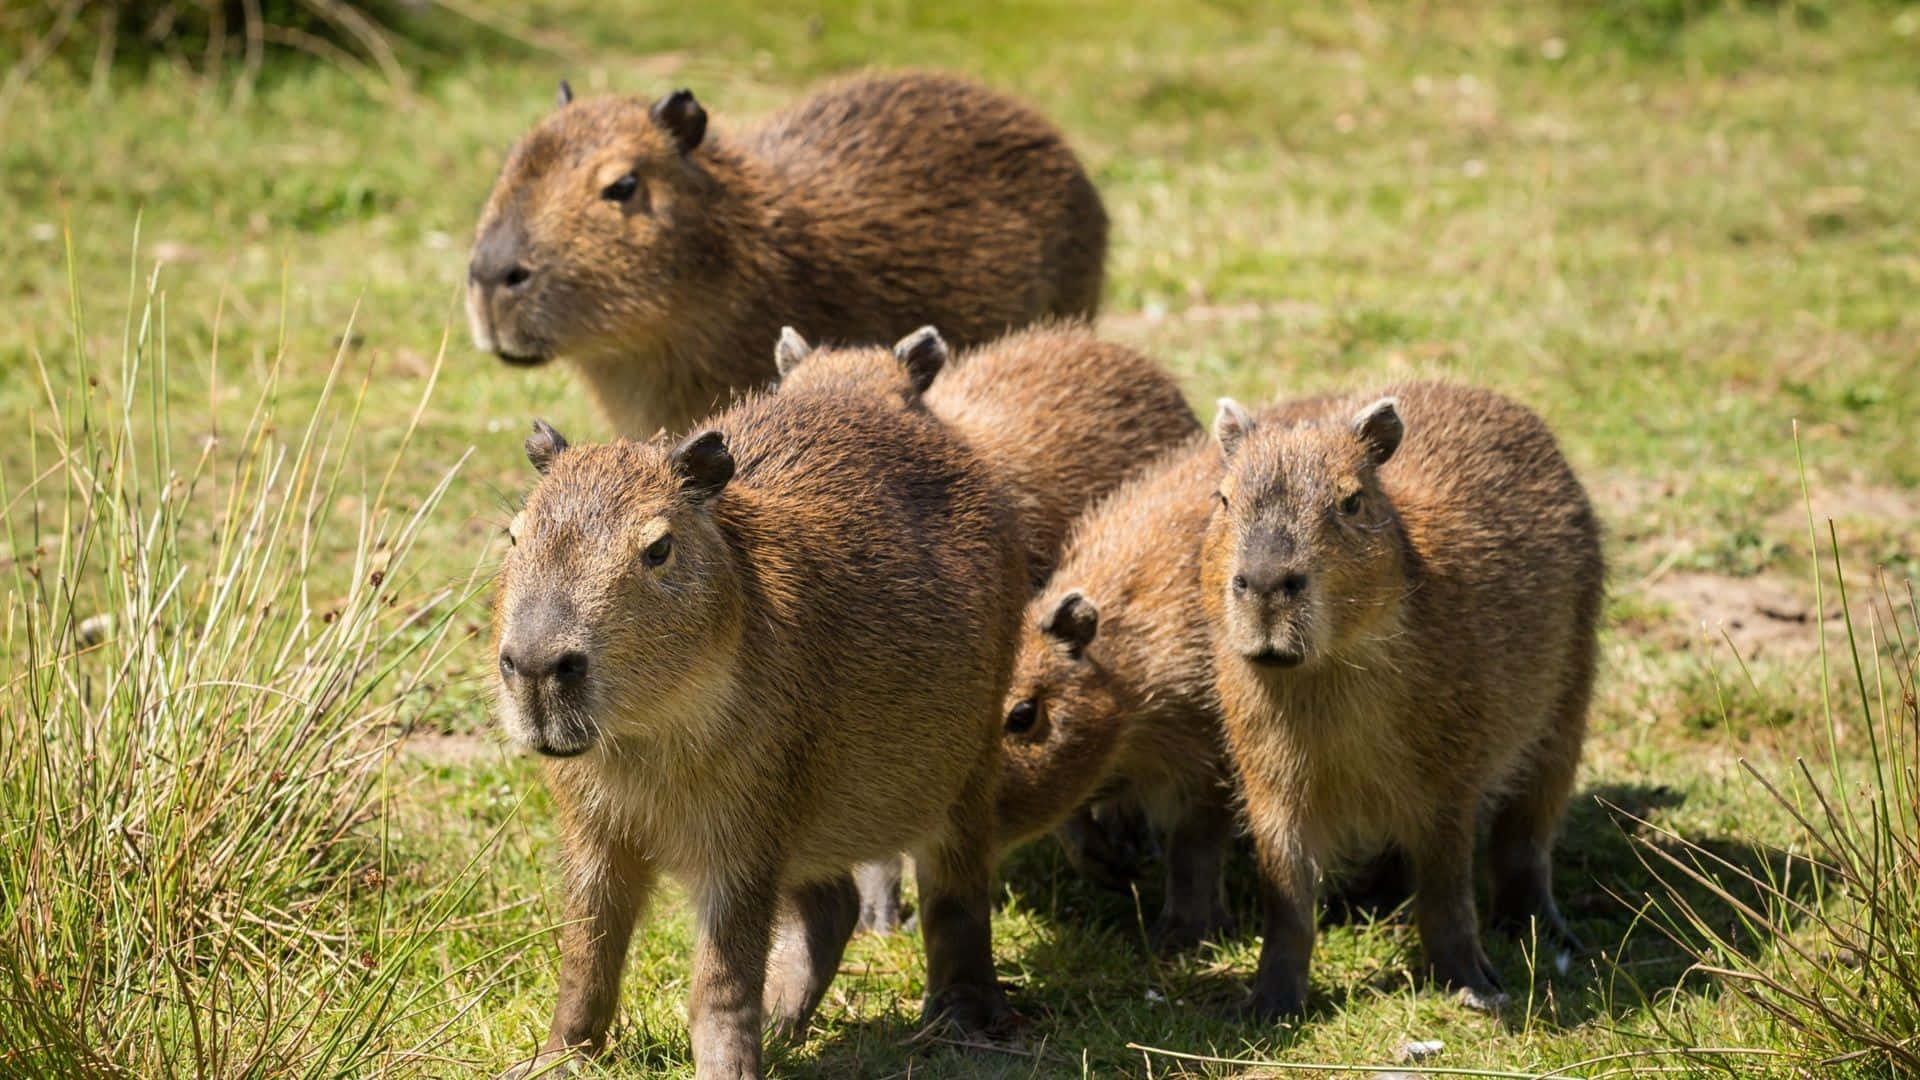 A large, adorable Capybara looking up at the viewer.